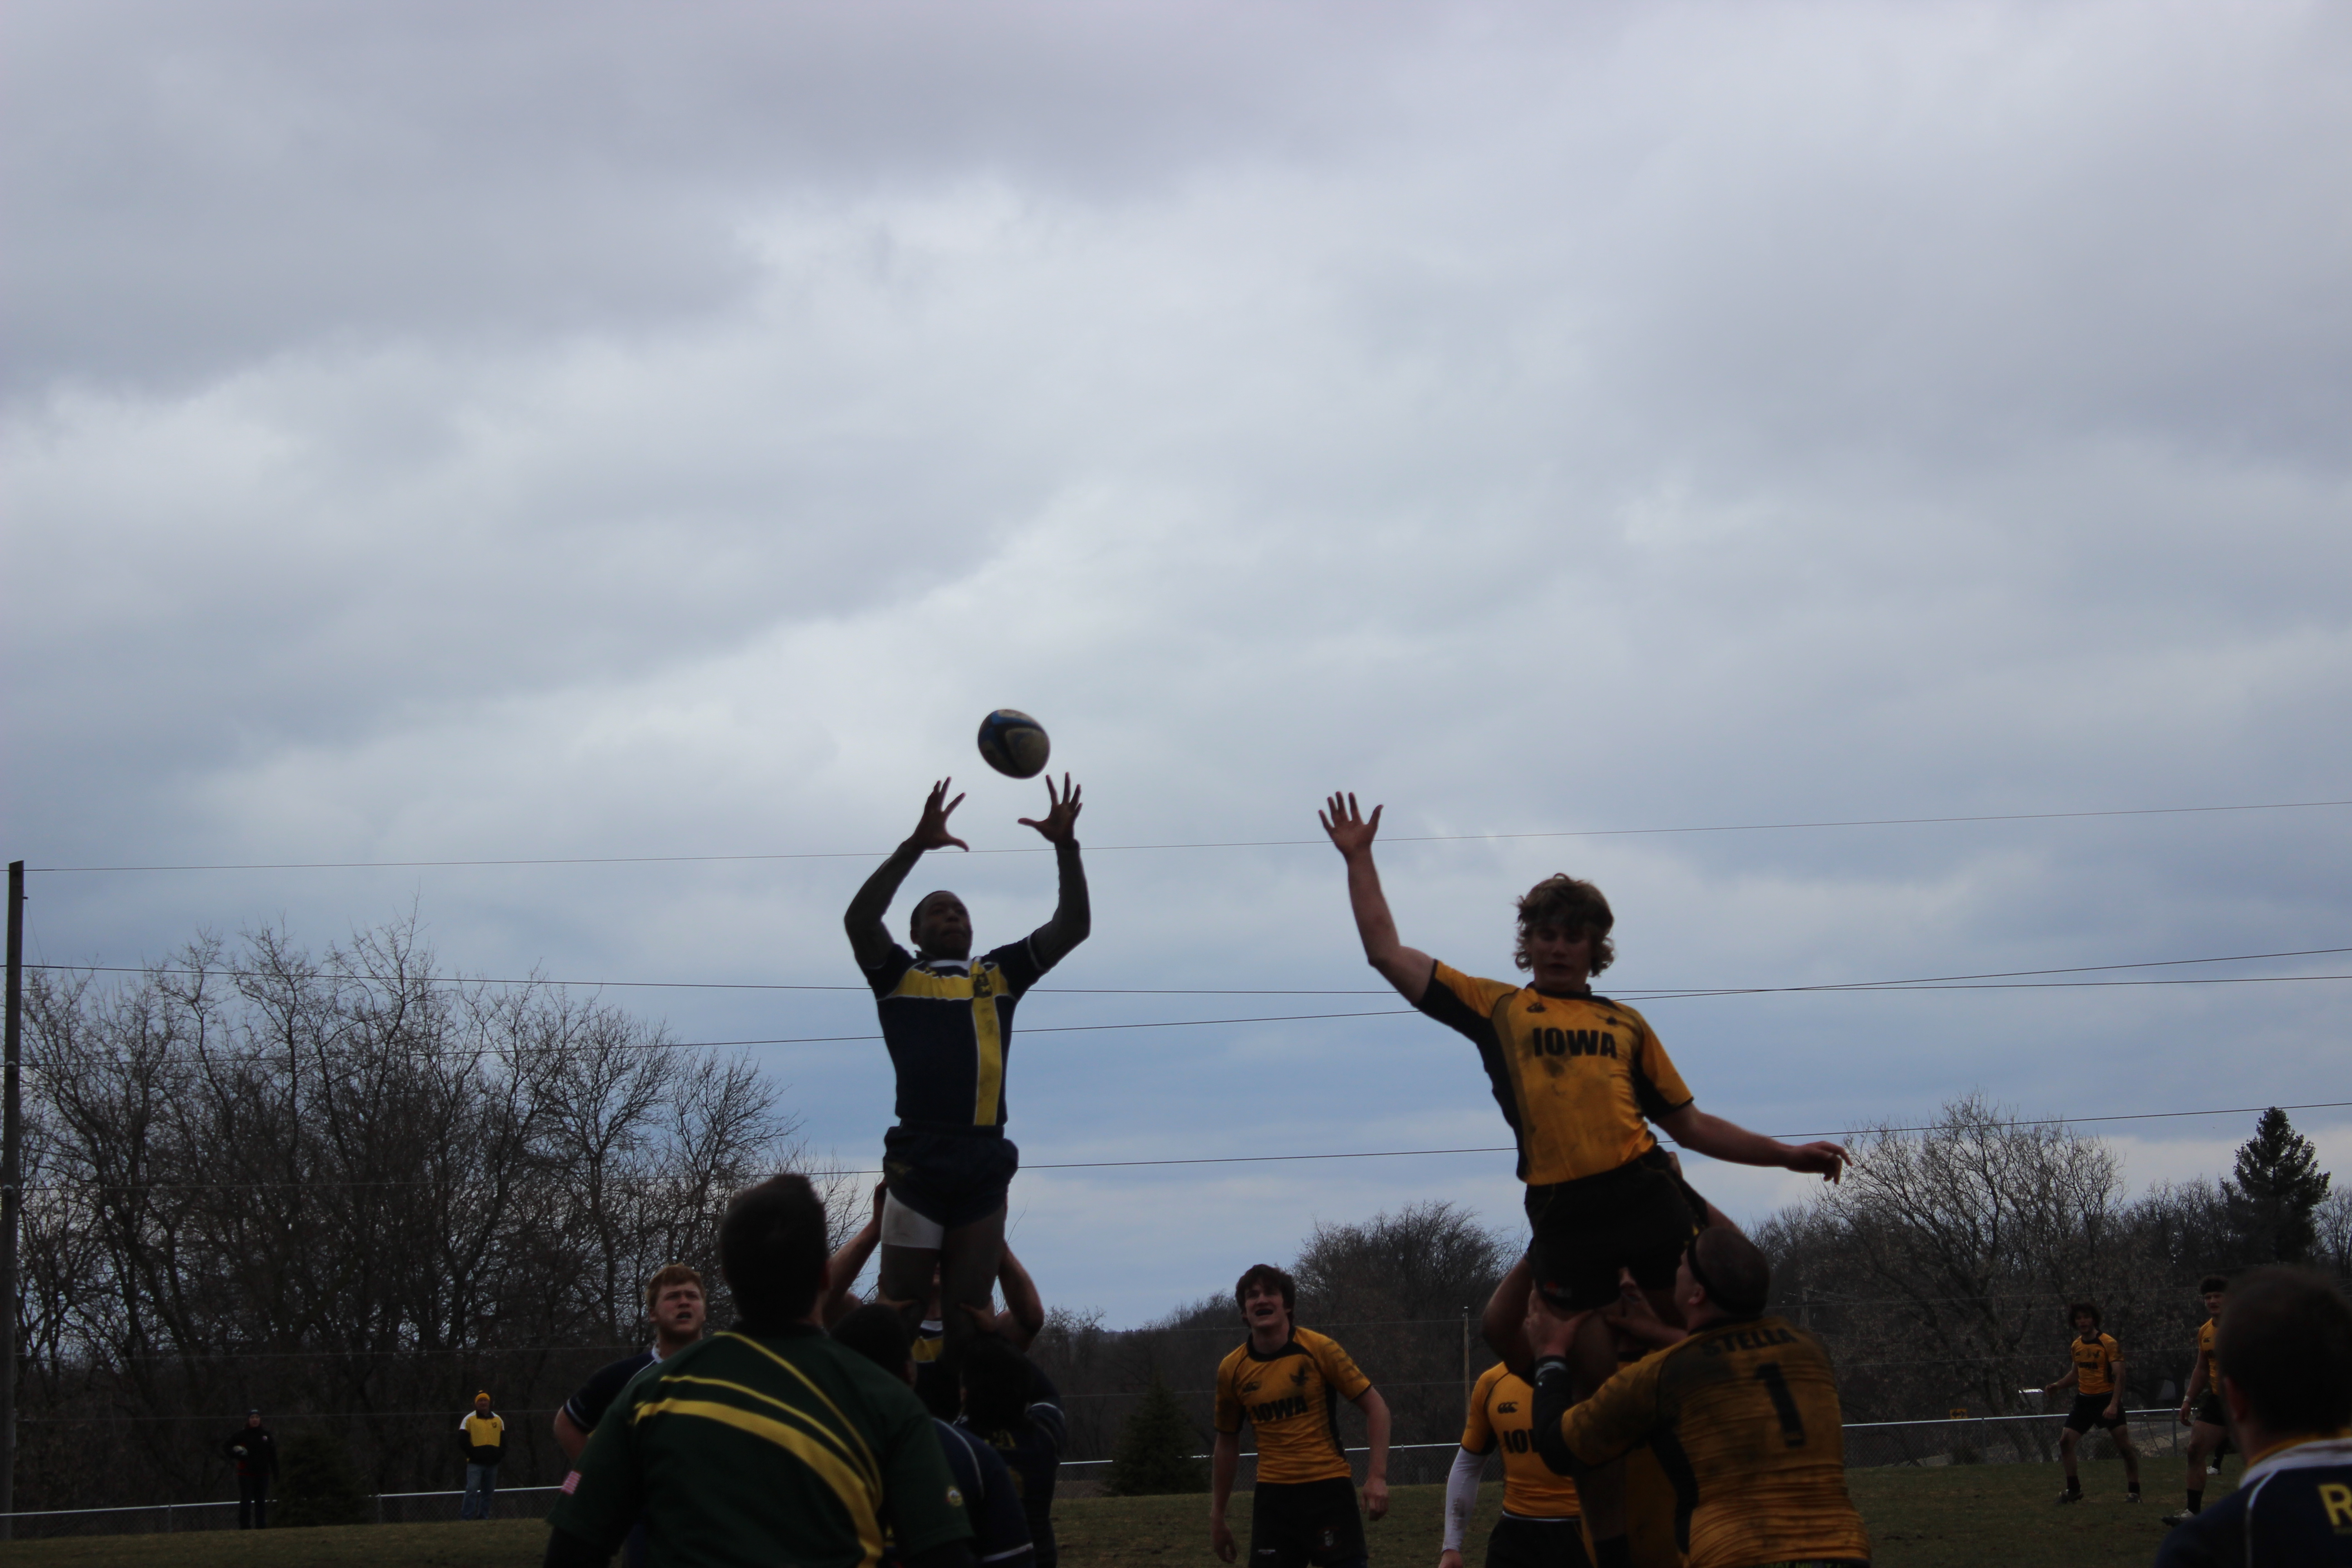 Chening Duker catches the ball during a lineout.